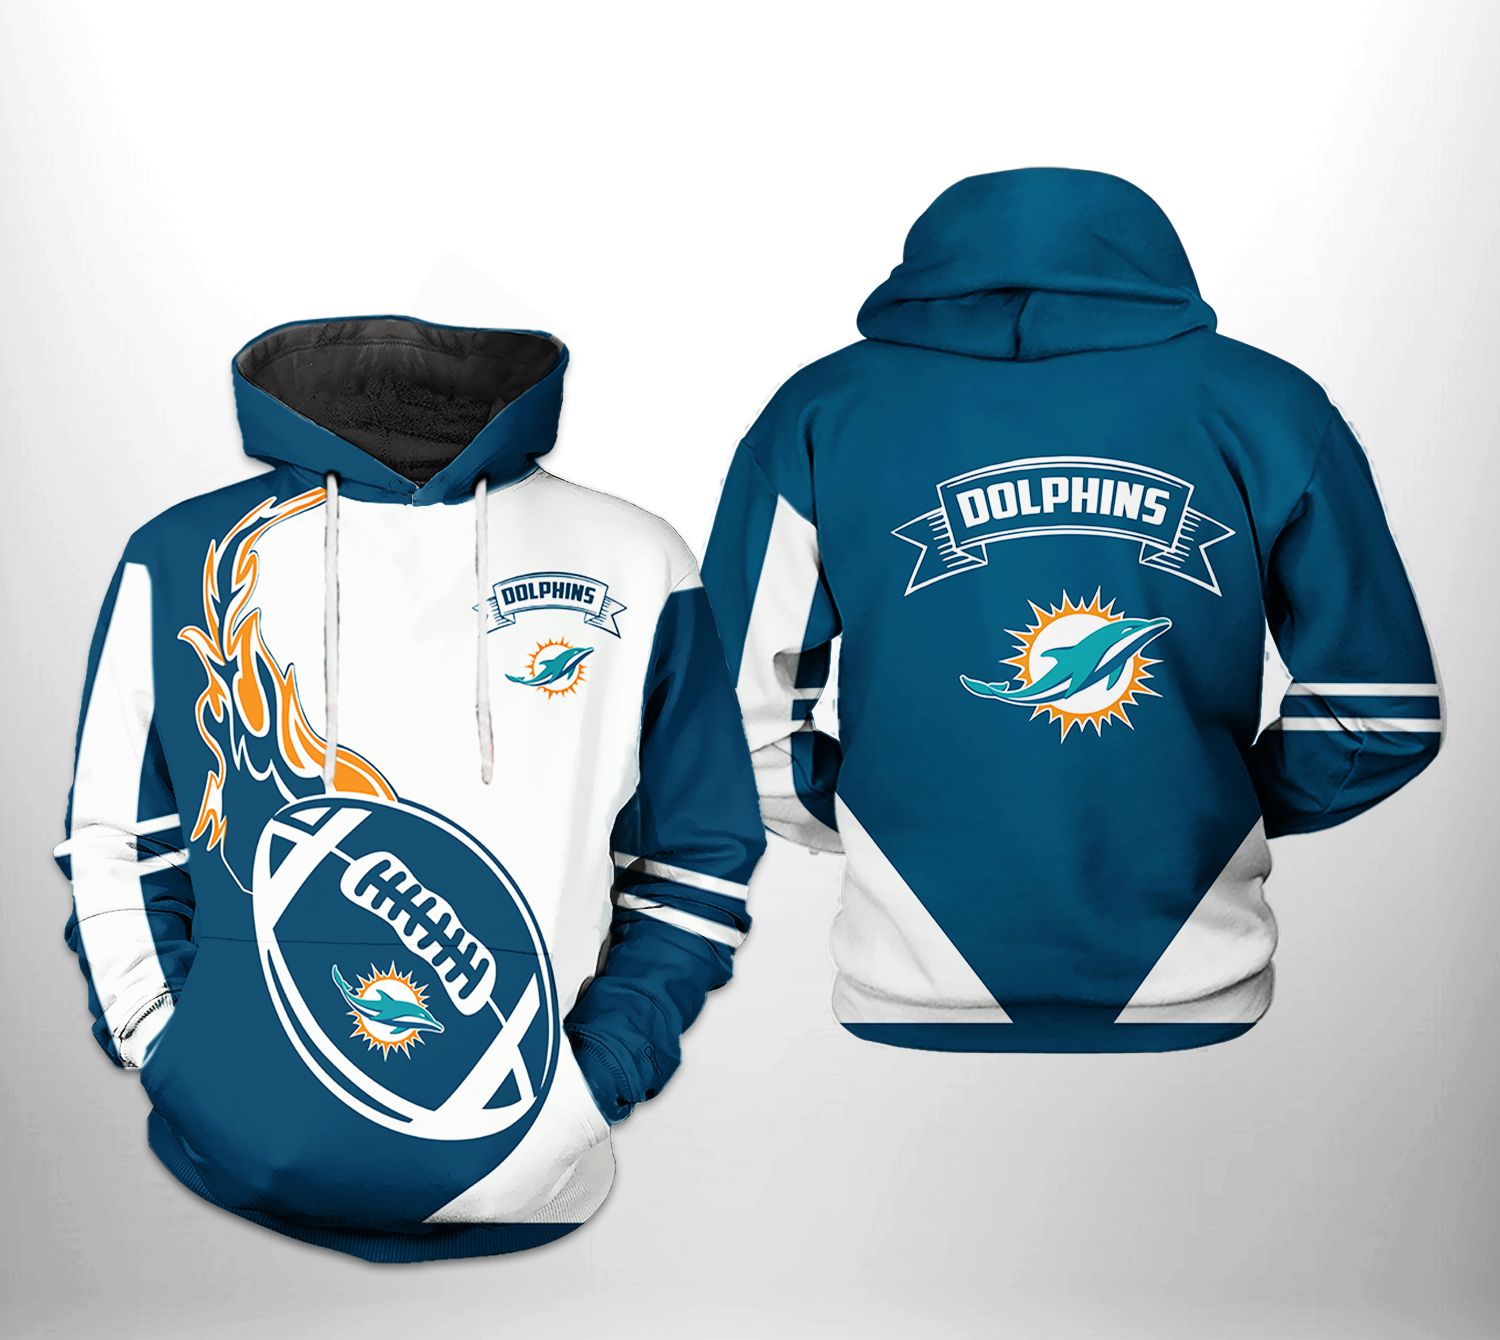 Miami Dolphins Shop - Miami Dolphins NFL Classic 3D Printed HoodieZipper Hoodie